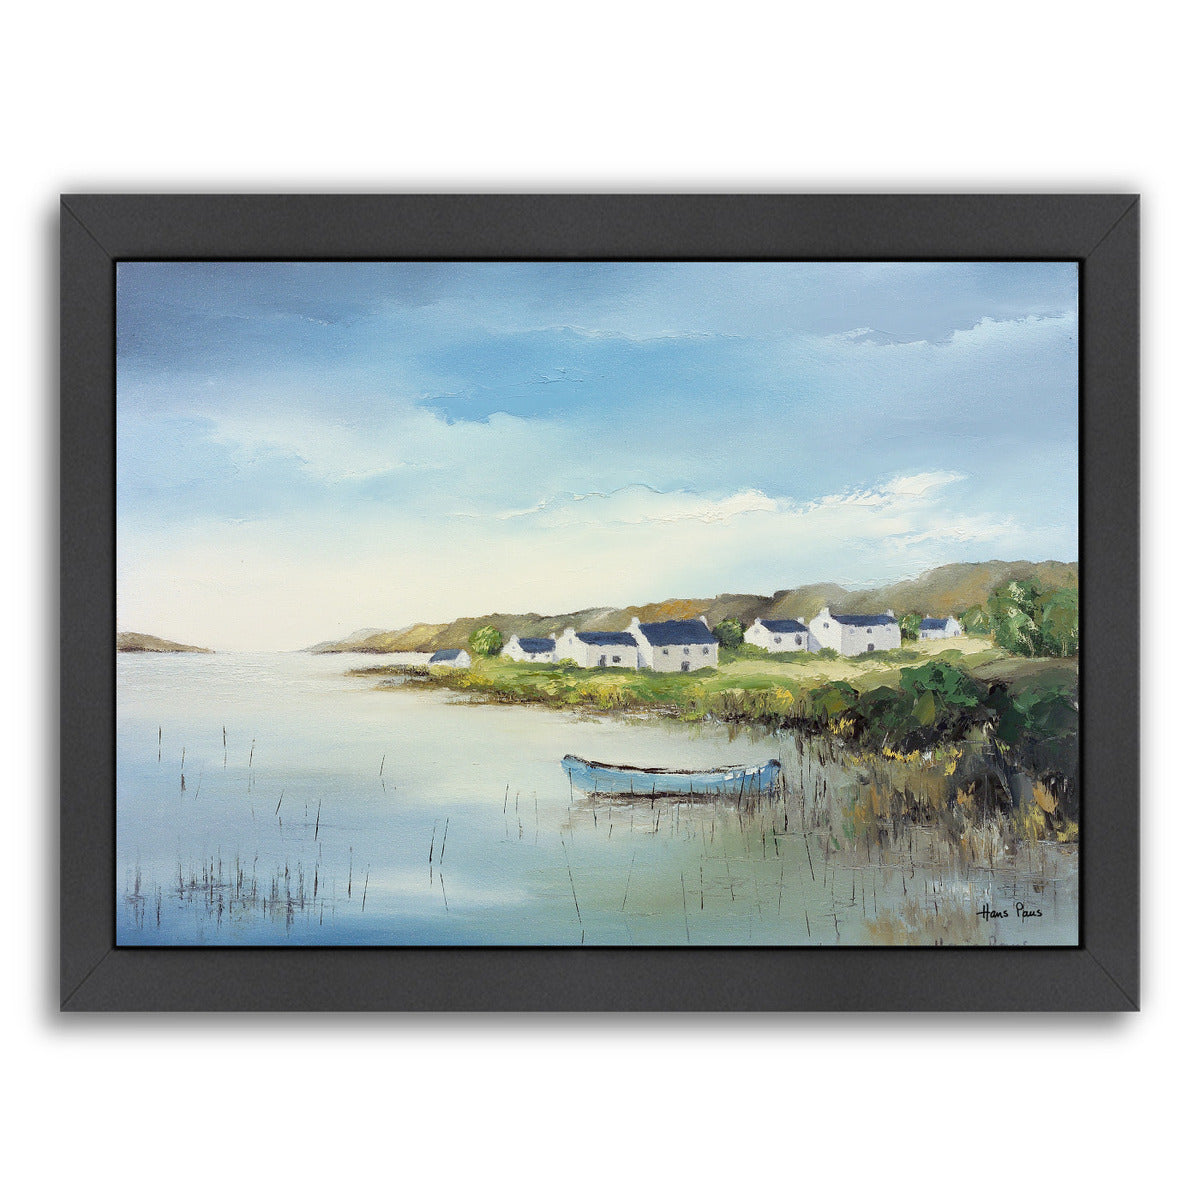 Houses With Boat By Hans Paus - Black Framed Print - Wall Art - Americanflat